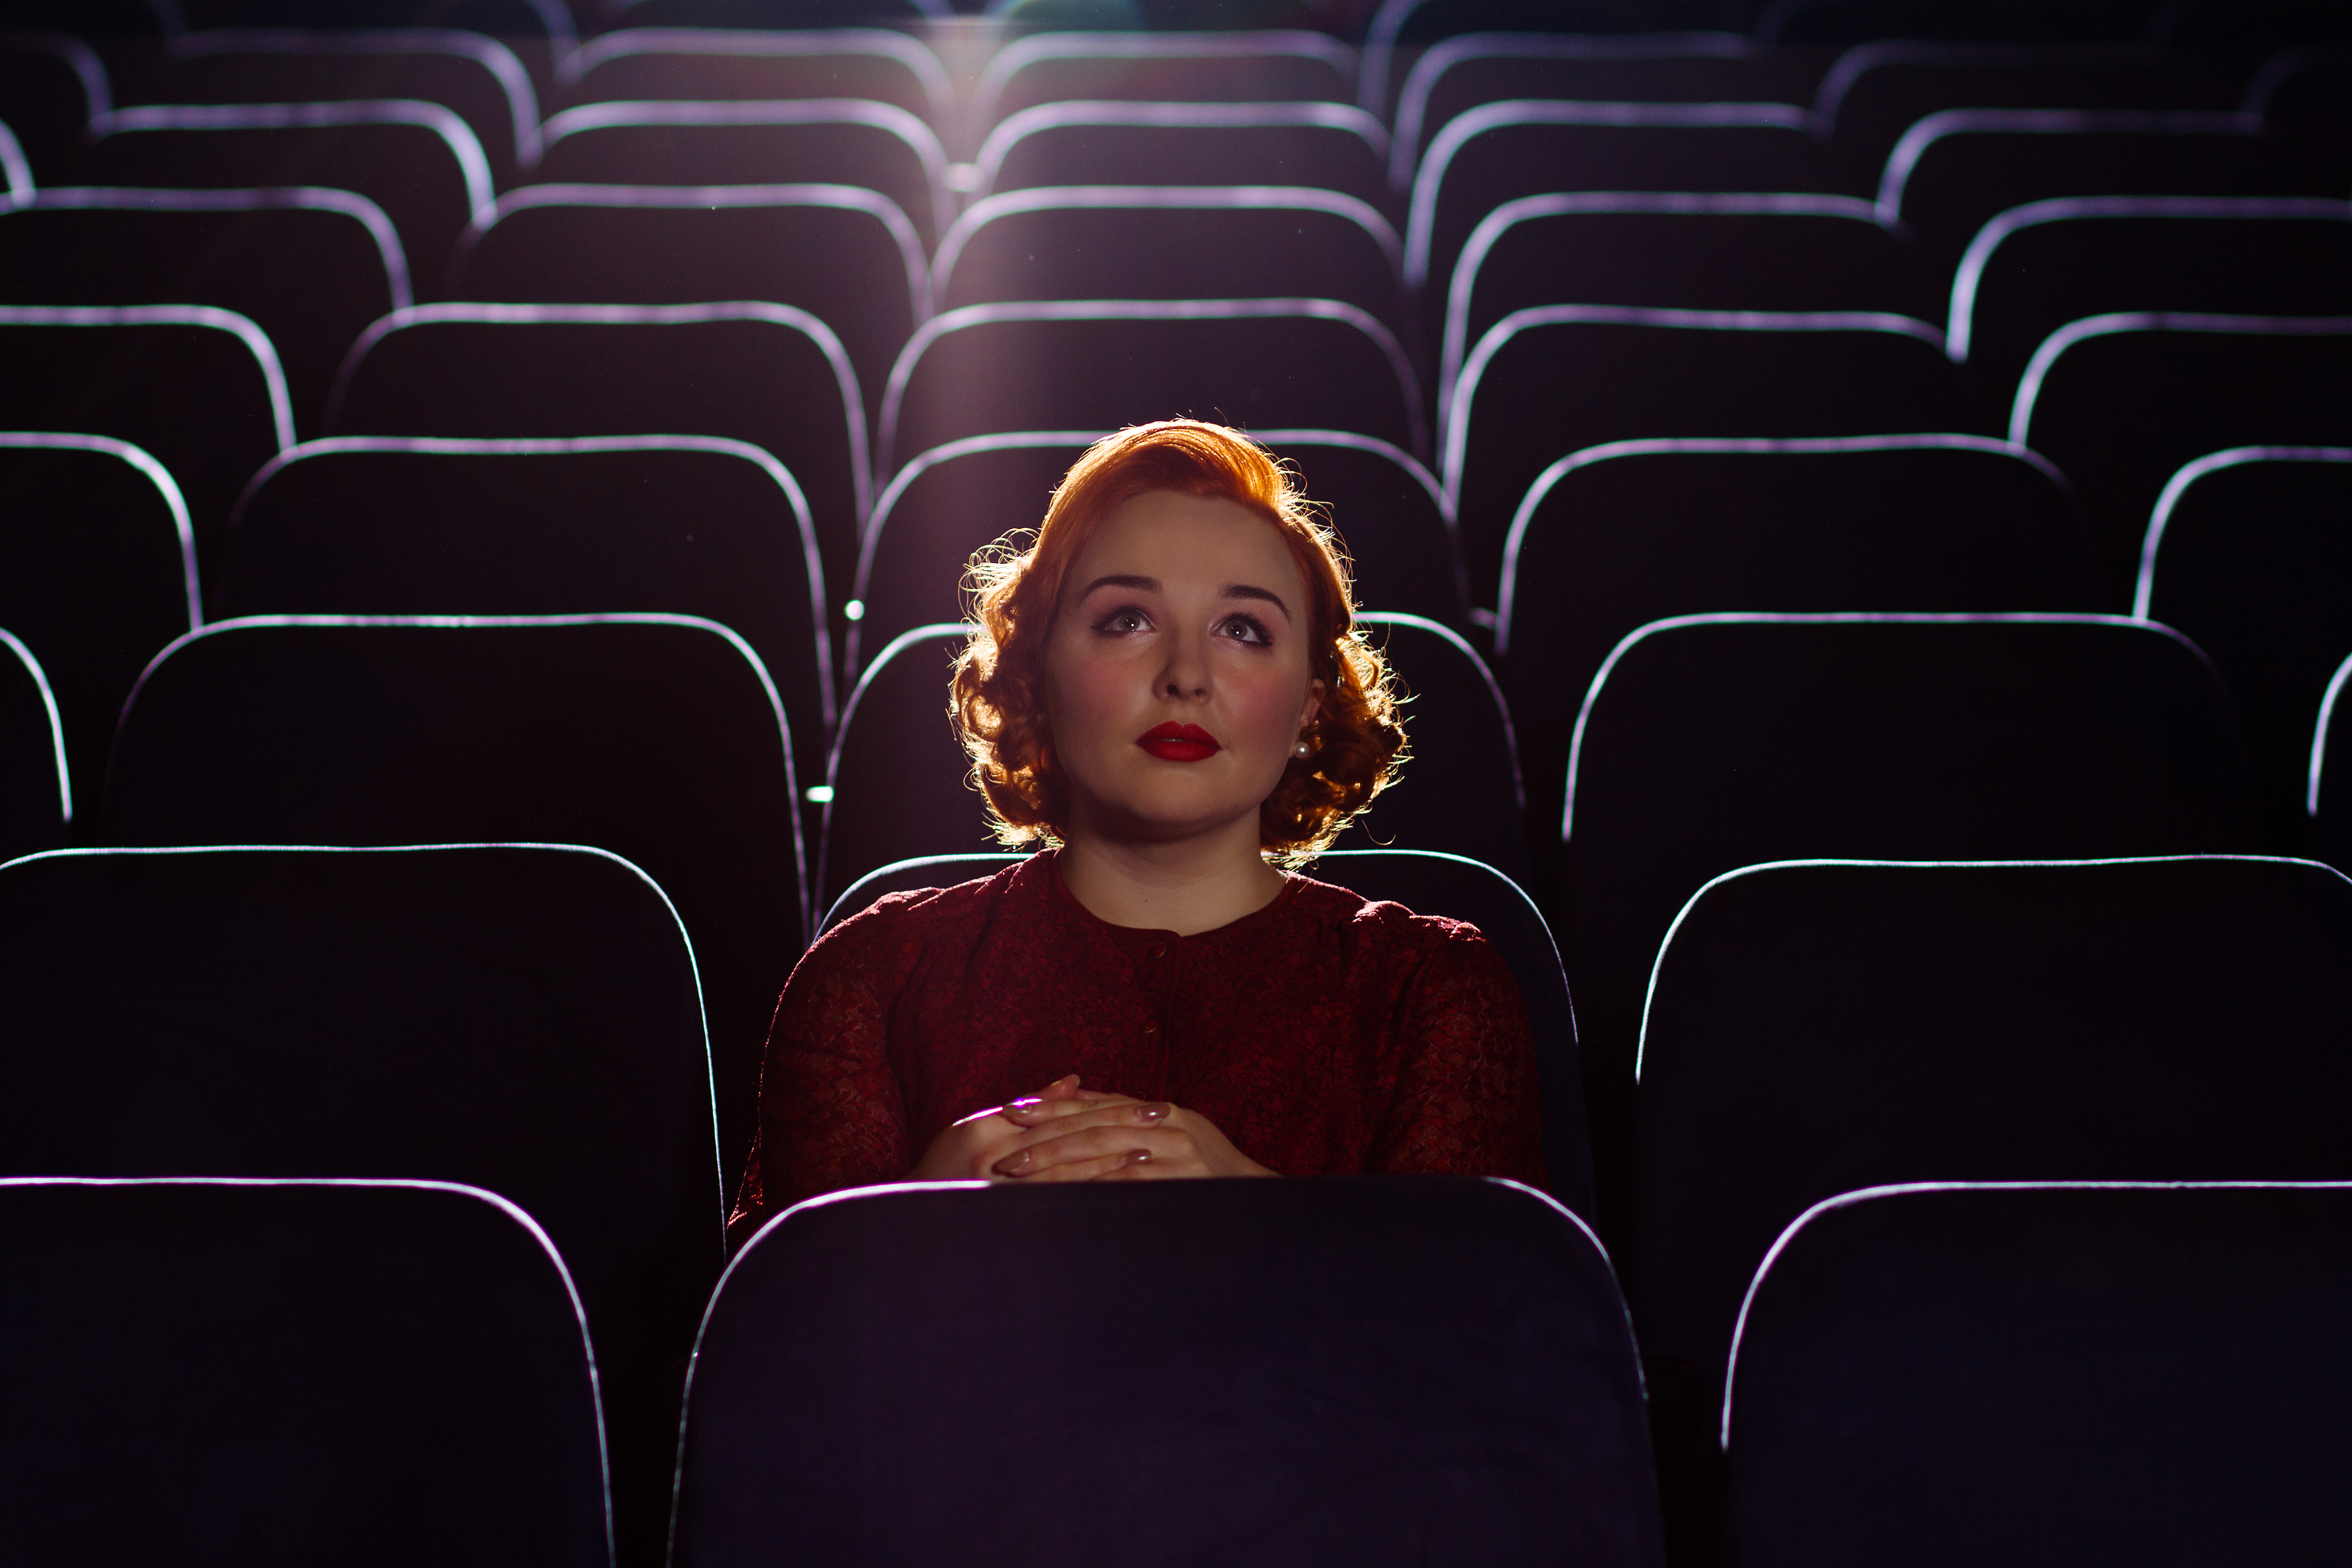 A woman sitting in a movie theater